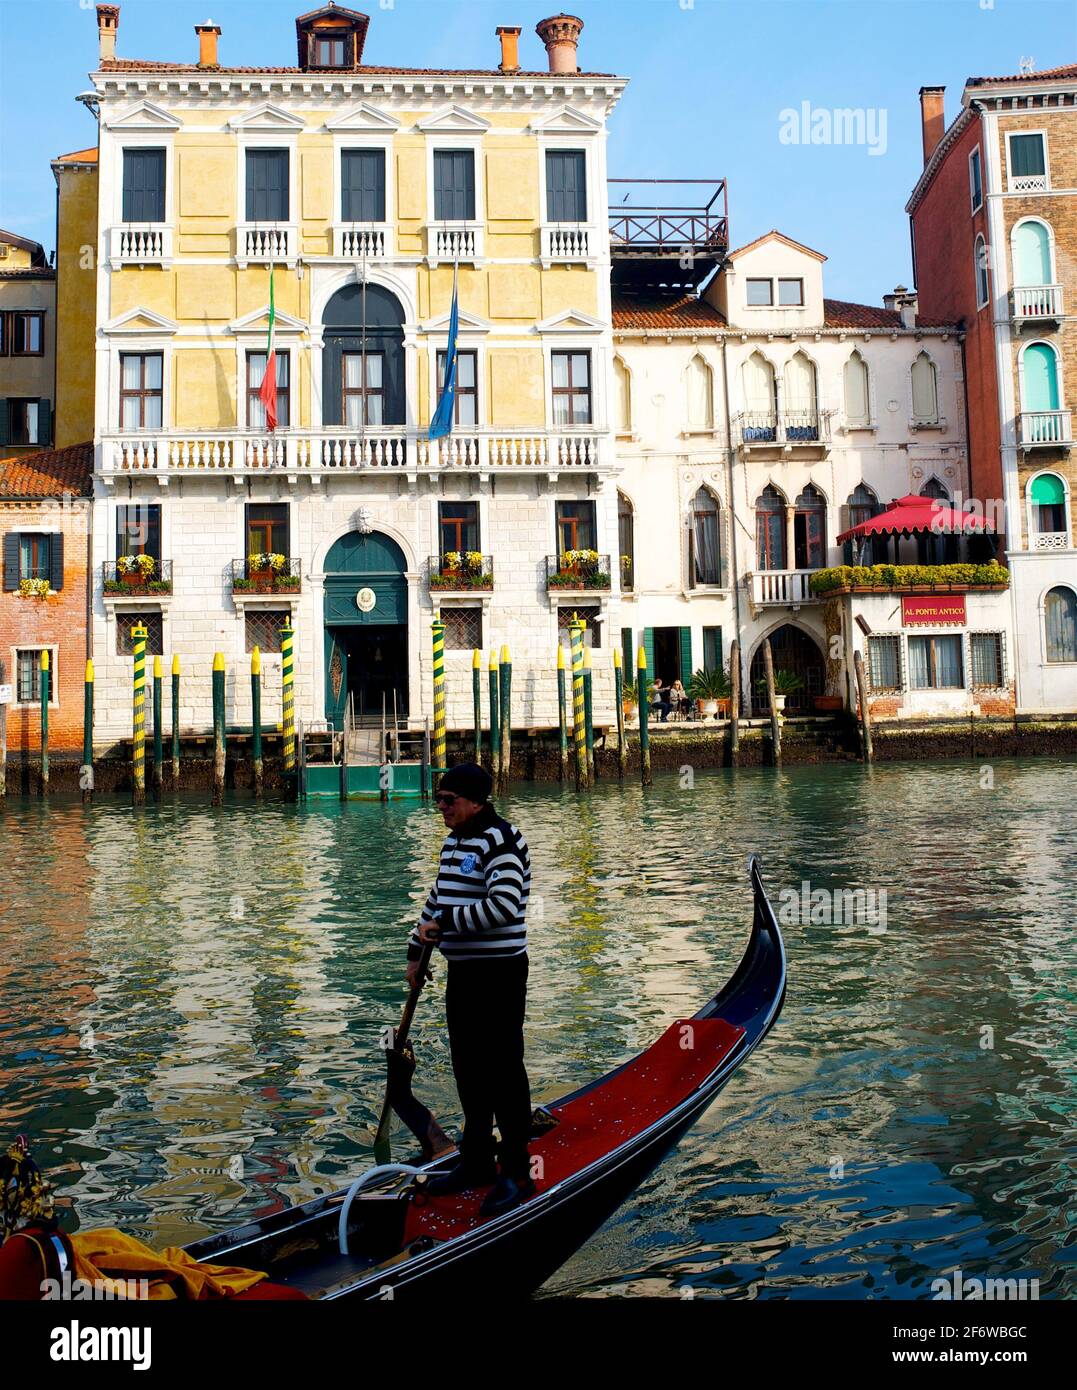 Man Rowing Boat In Canal By Building Stock Photo